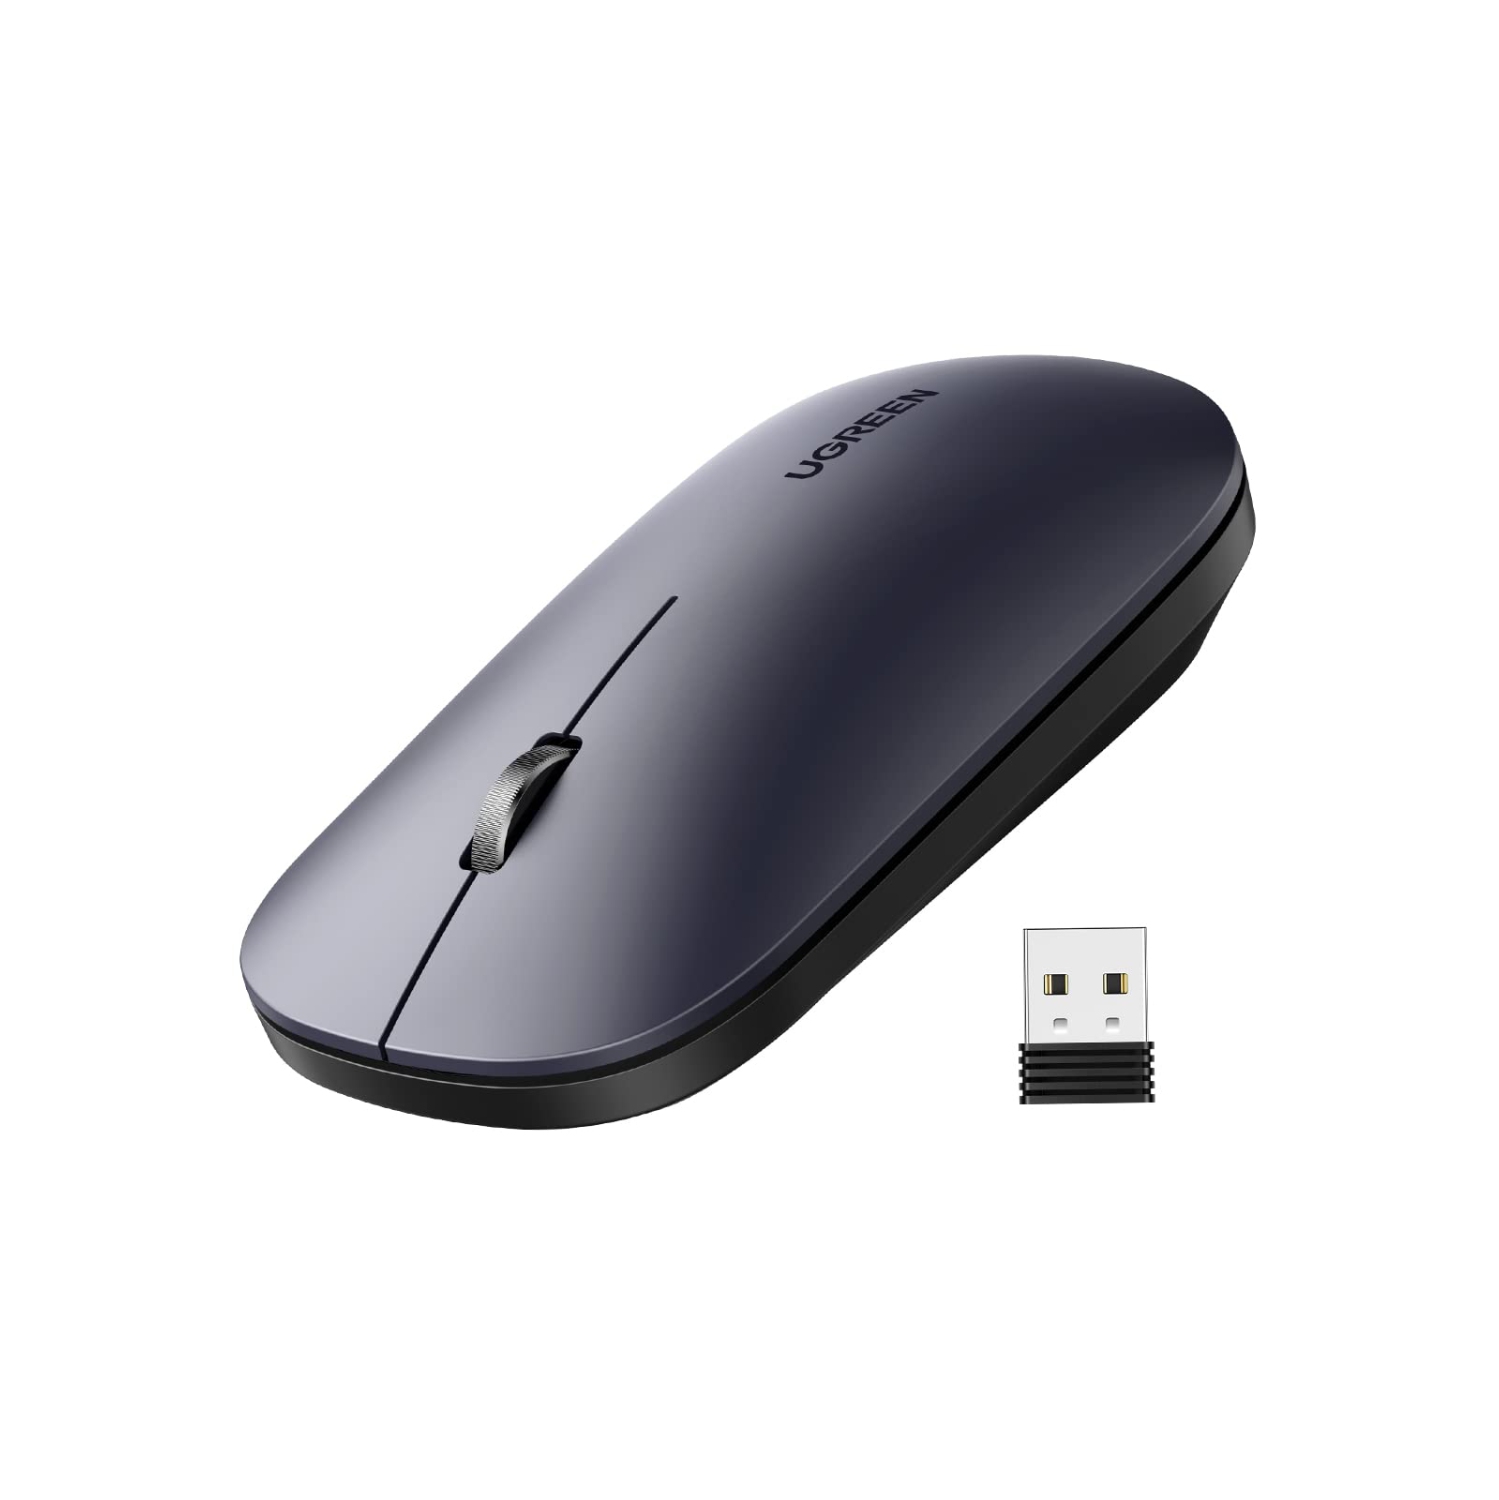 UGREEN Wireless Mouse for Laptop Computer Mouse Slim Slient Mouse 2.4GHz with 4000 DPI USB Cordless Mouse with 18-Month Batt